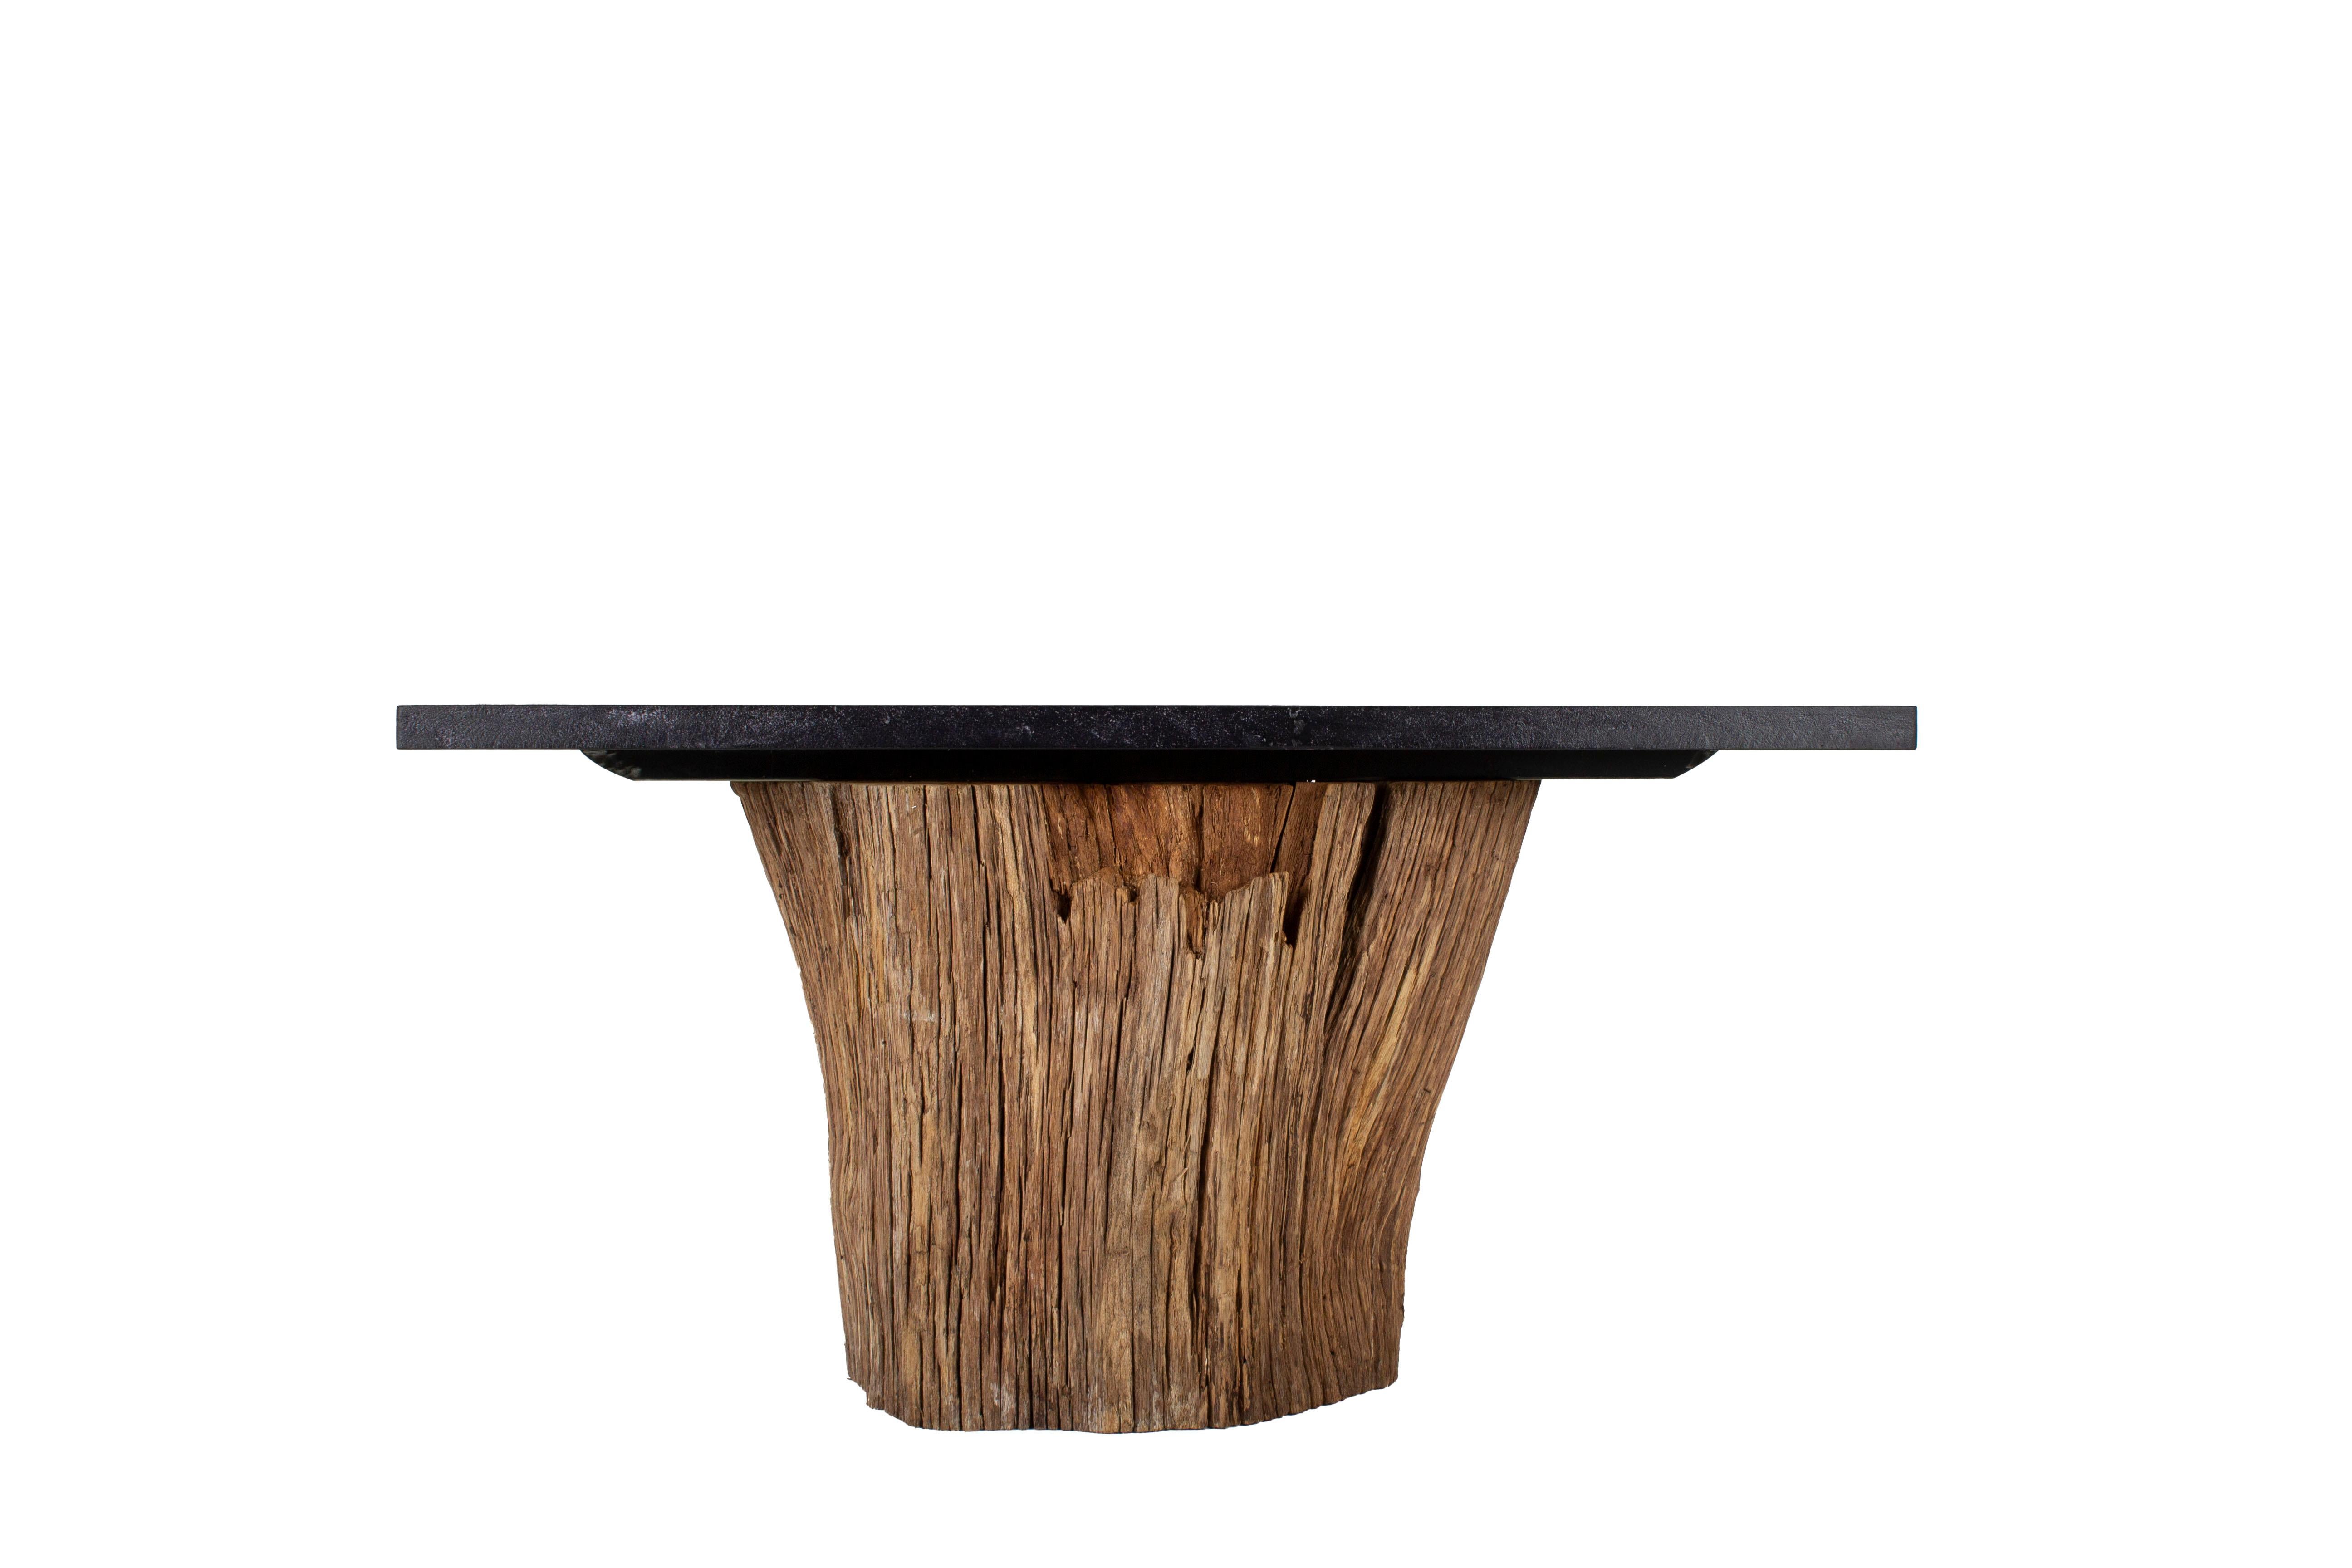 Organic form console table in weathered cedar from Bass farm, Eastern North
Carolina. I chose this log for it’s implied motion found in the subtle twisting of the log.

A fallen tree harvested from the low land creek area of the farm populated